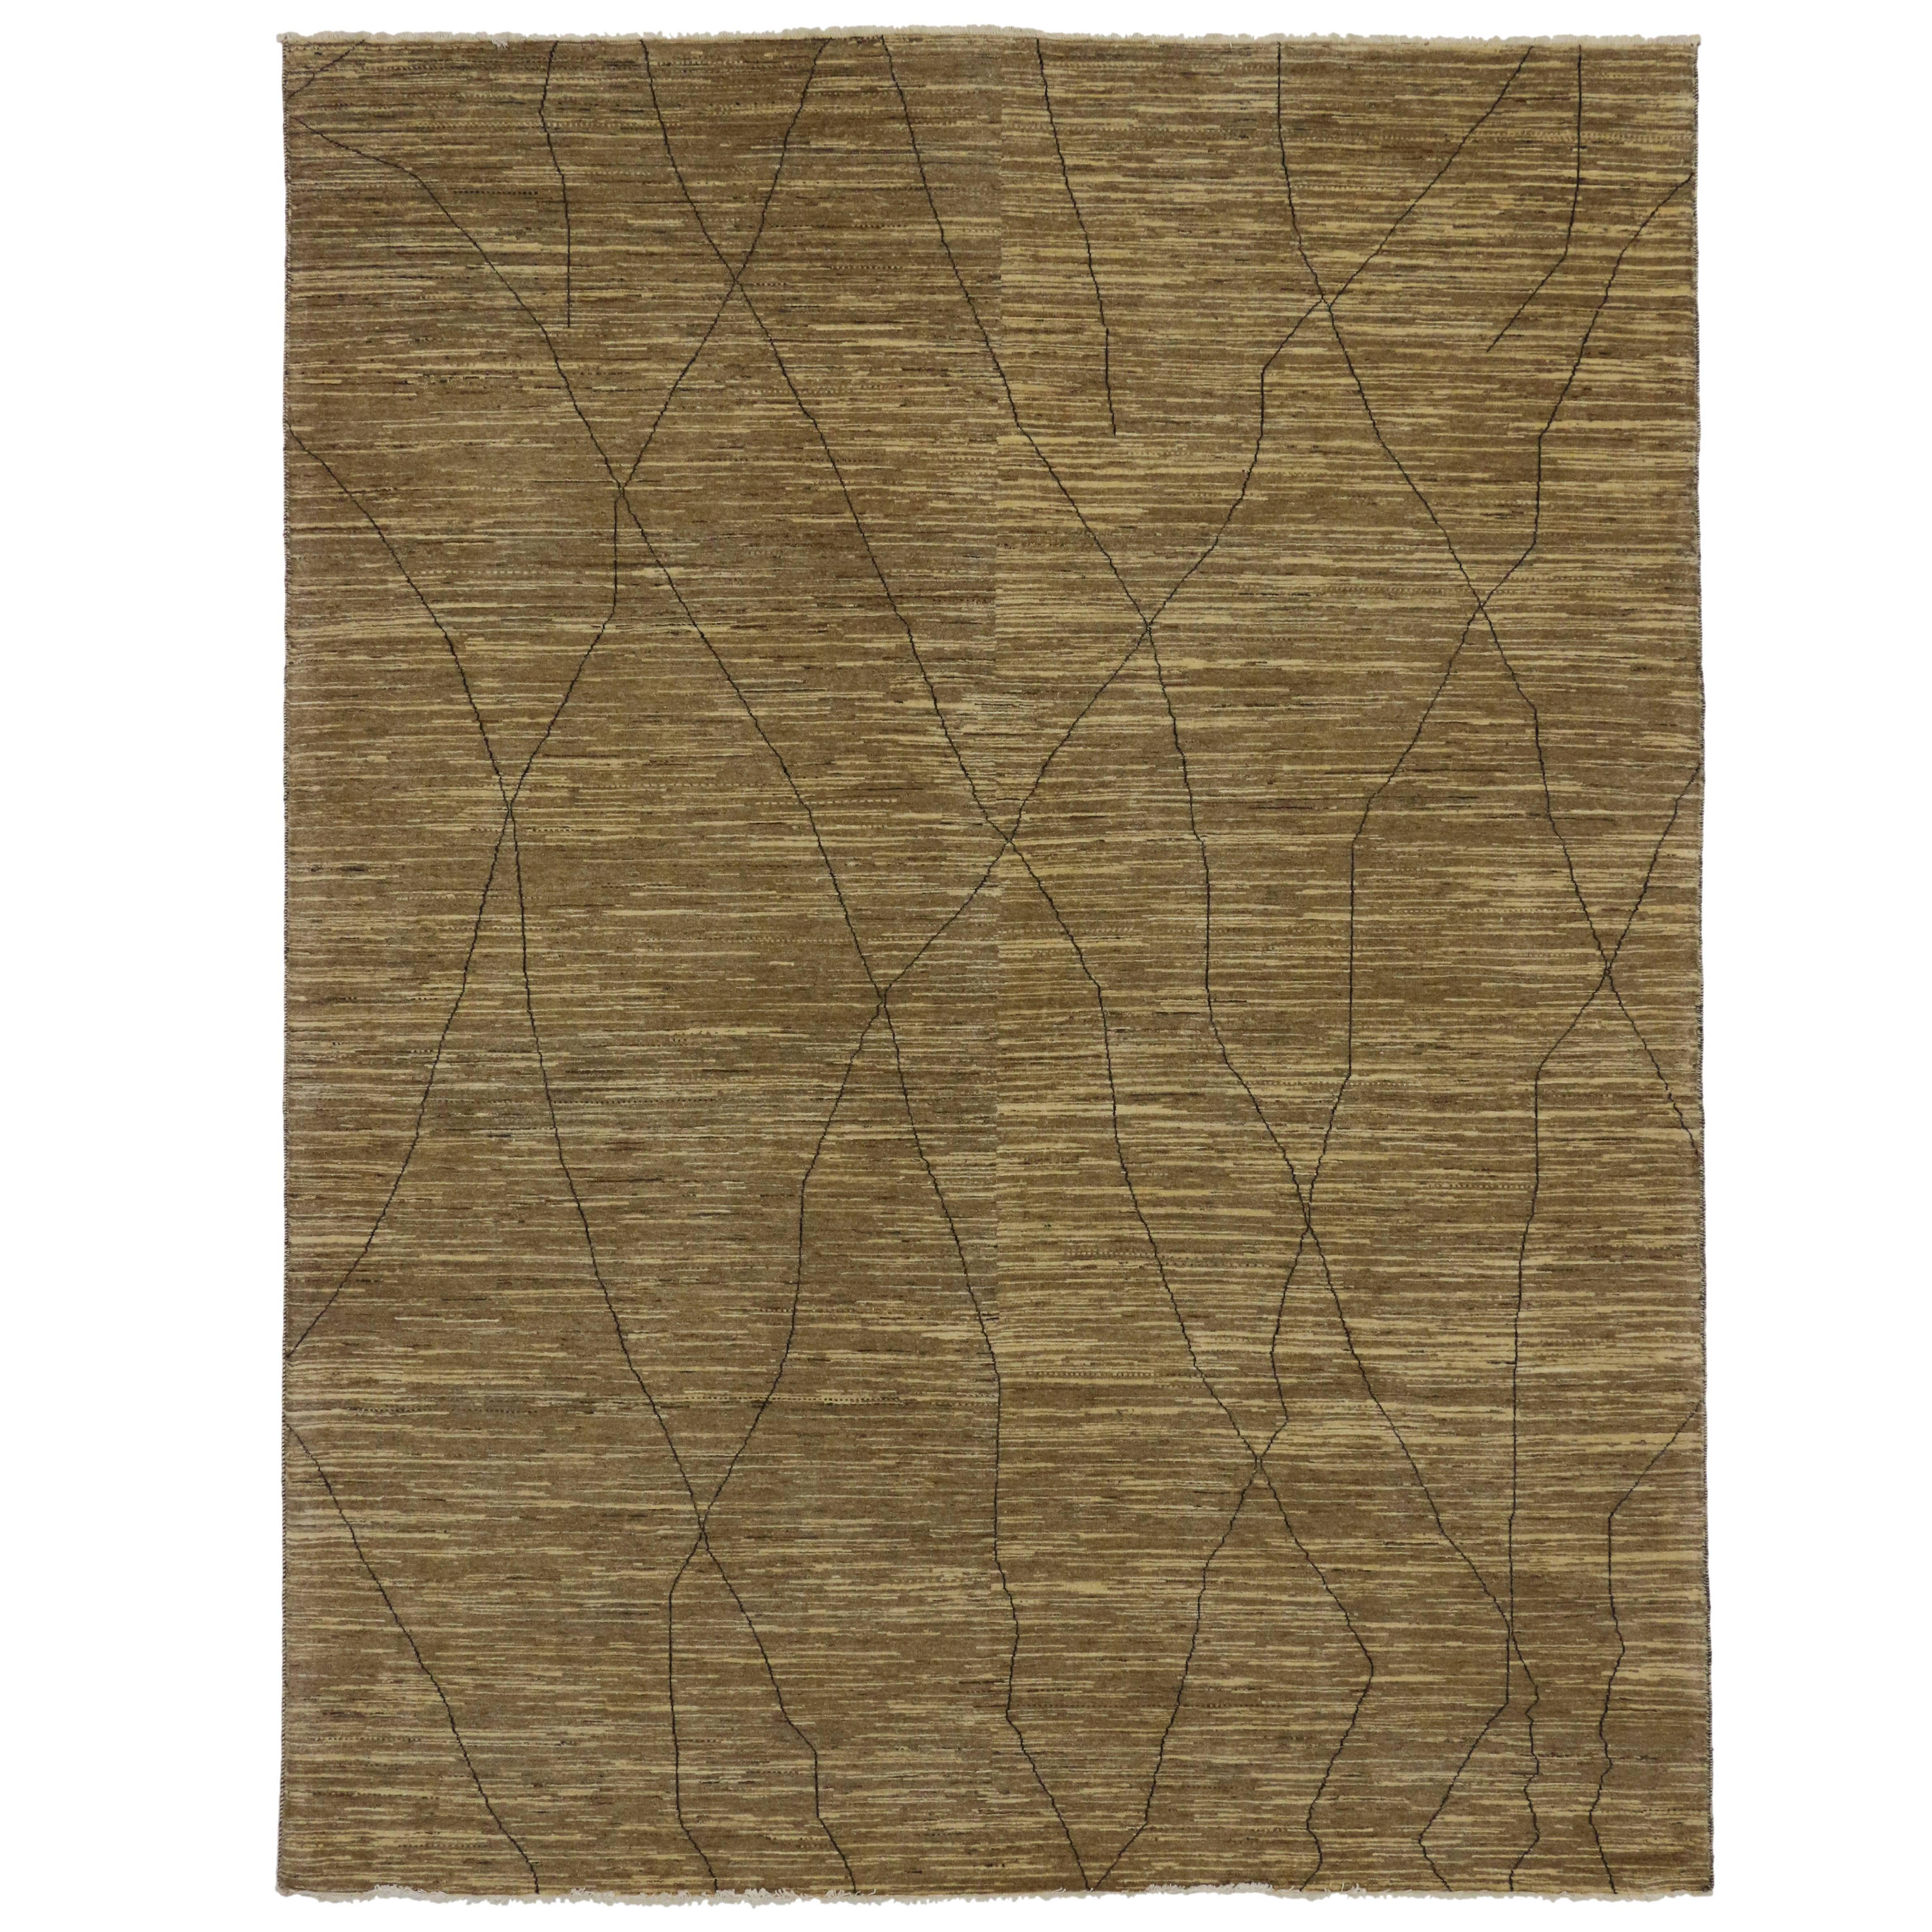 New Contemporary Moroccan Area Rug with Modern Design, Warm Neutral Earth Tones